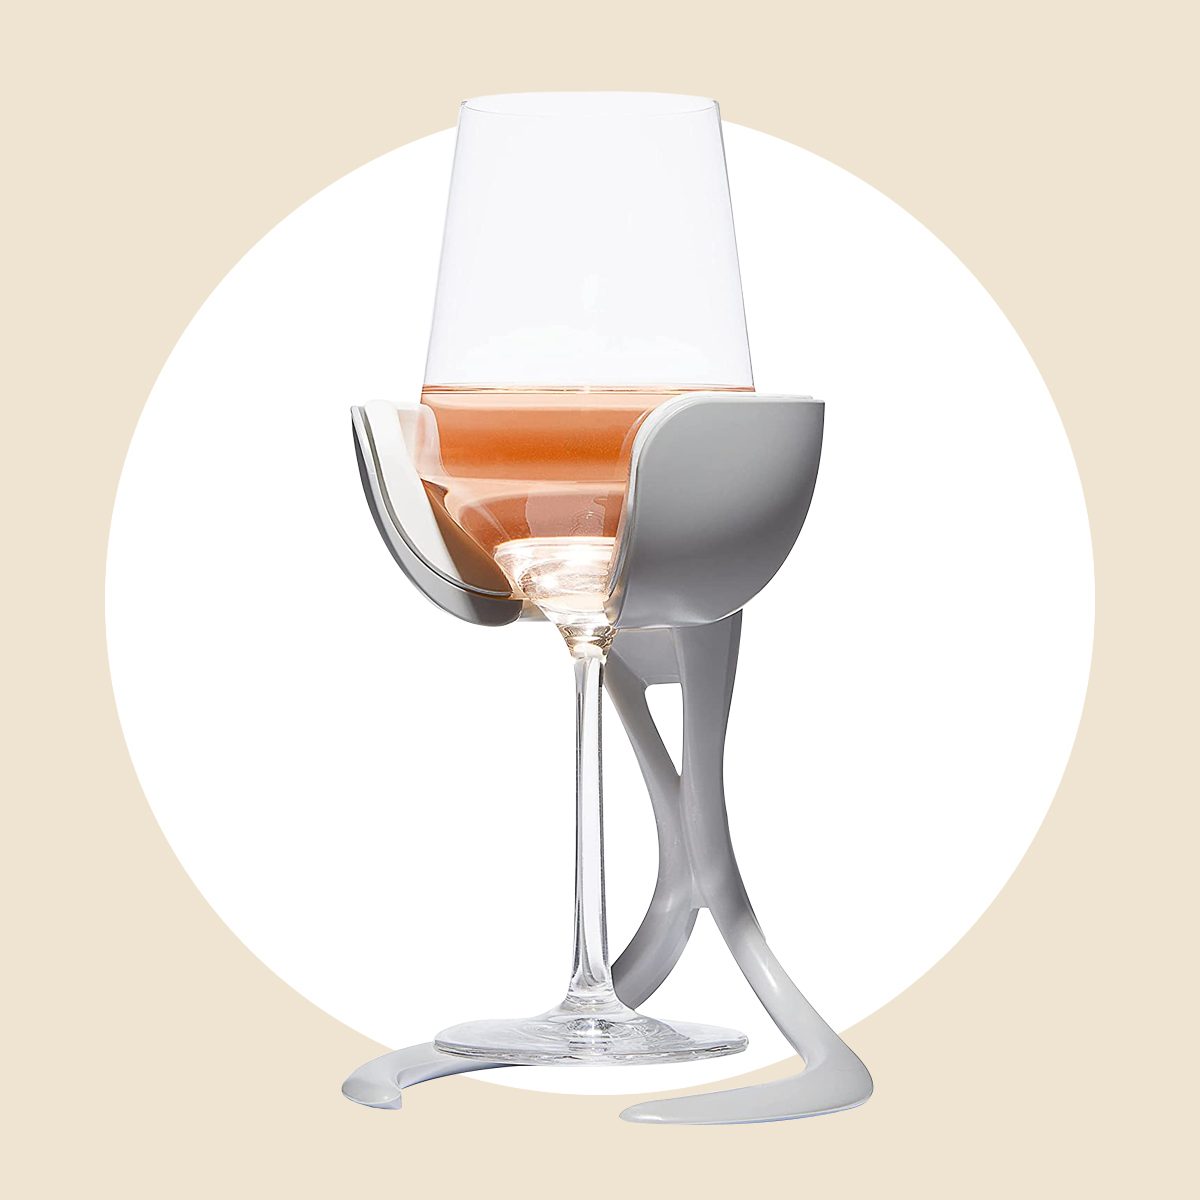 49 Gifts for Wine Lovers (That Aren't Cutesy Glass Charms)